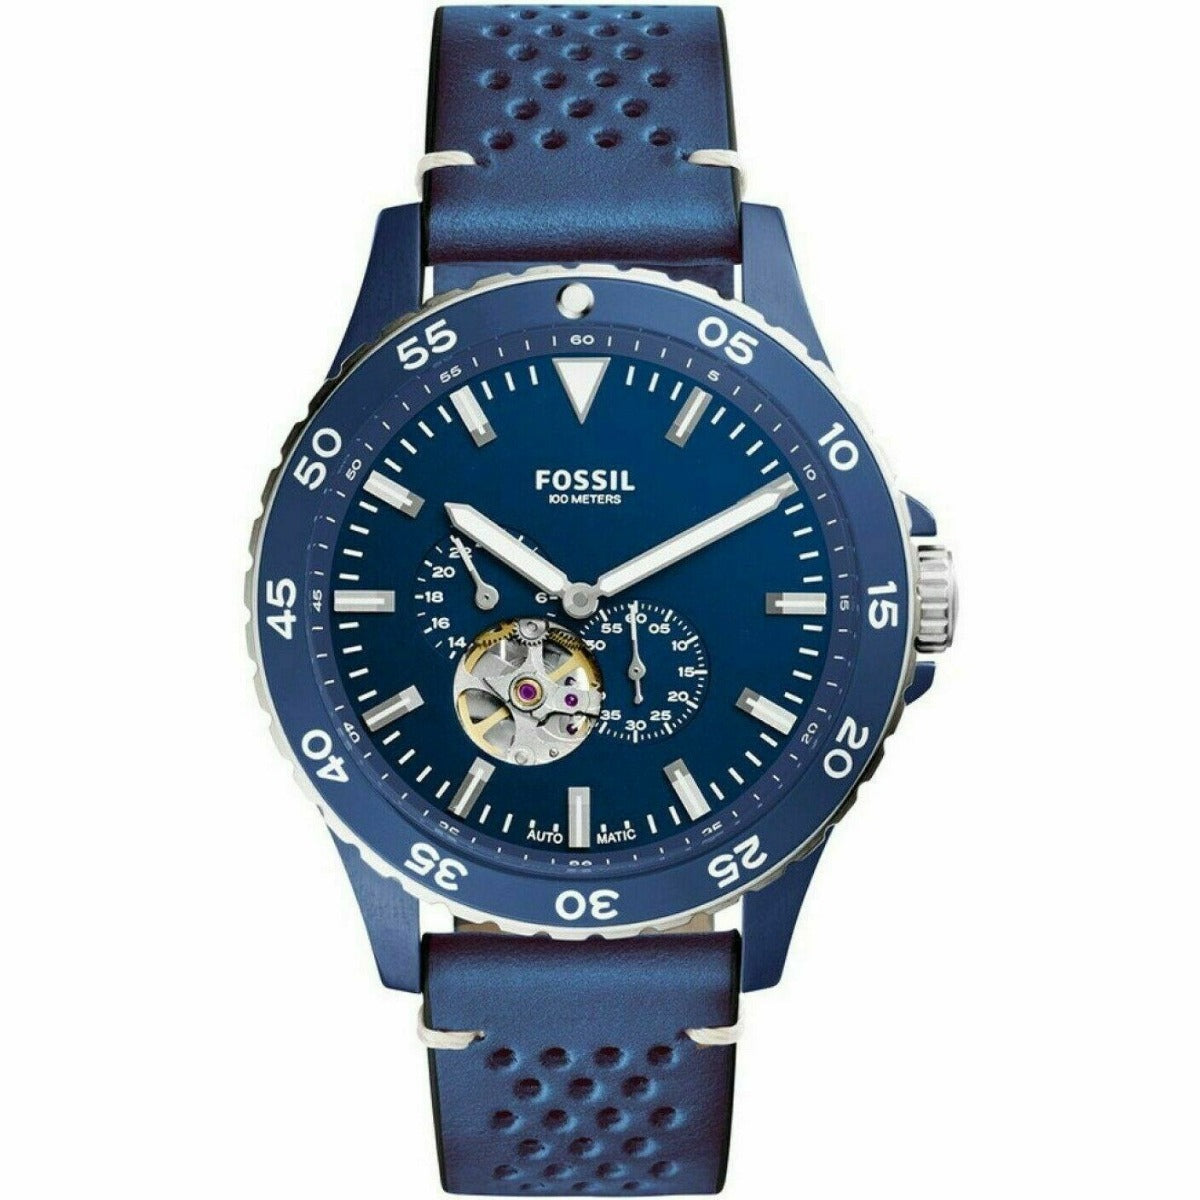 FOSSIL ME3149 CREWMASTER SPORT AUTOMATIC BLUE LEATHER MEN'S WATCH 796483329195